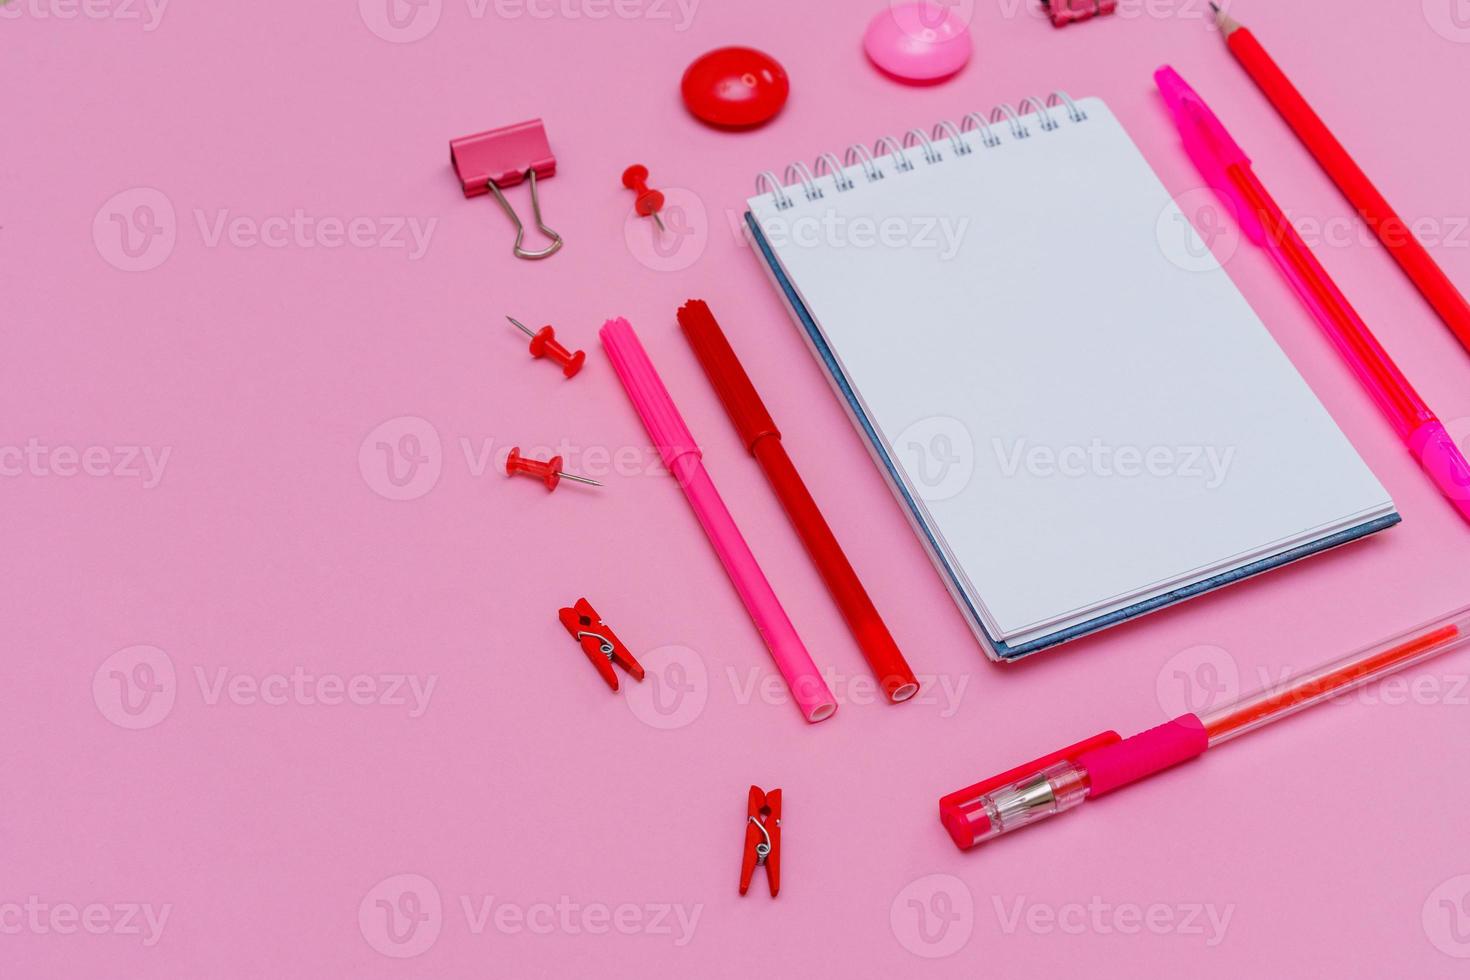 Stationery in pastel pink shades. On a pink background, flat lay. Markers photo